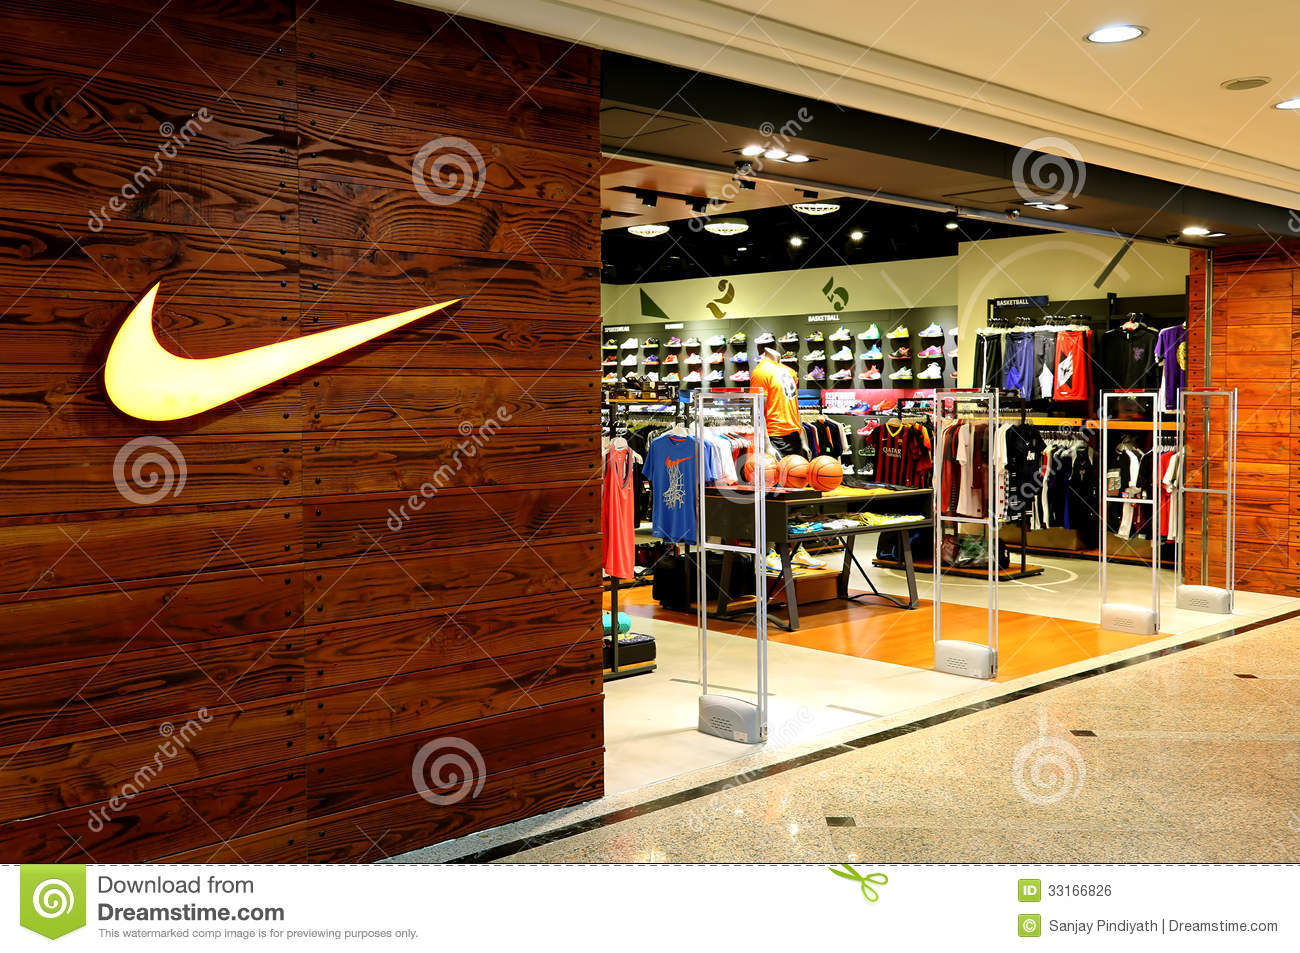 Nike Sports Store Or Outlet Editorial Photo   Image  33166826